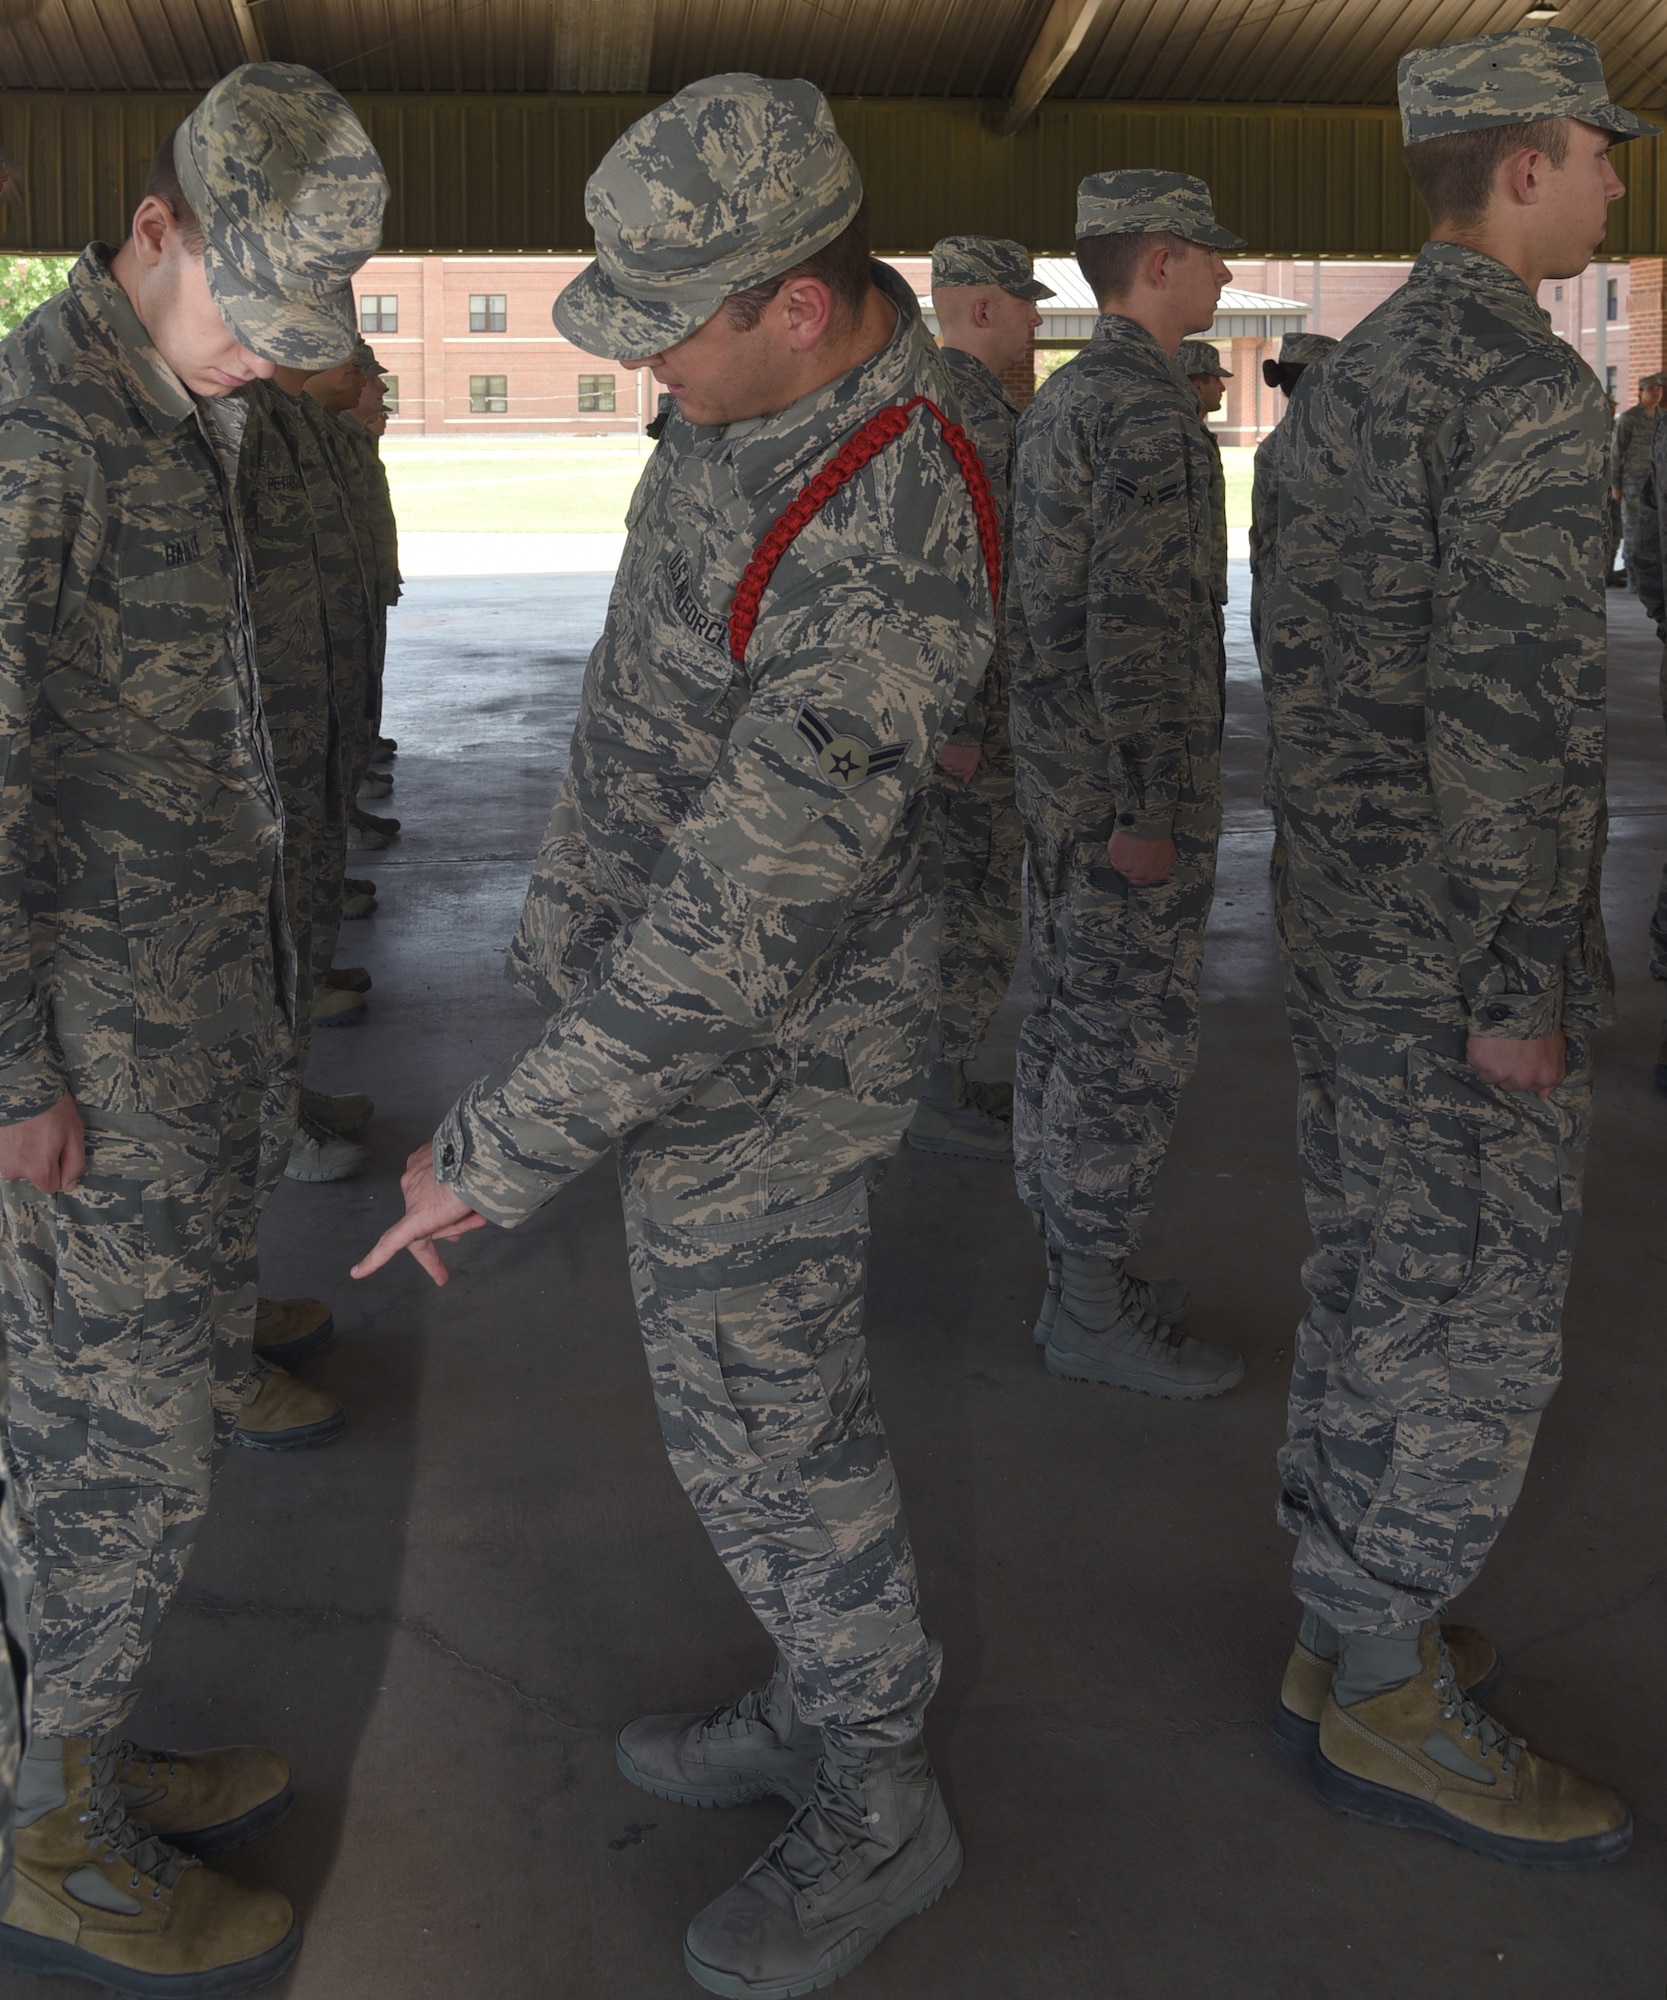 U.S. Air Force Airman 1st Class Jordan Stidham, 316th Training Squadron student and a red rope level Airman Leader, indicates an unclipped string on a fellow Airman’s uniform during an open rank inspection outside the 316th TRS  on Goodfellow Air Force Base, Texas, May 14, 2019. Stidham’s red rope distinguishes him as an Airman Leader who holds the highest level responsibility. (U.S. Air Force photo by Airman 1st Class Abbey Rieves/Released)